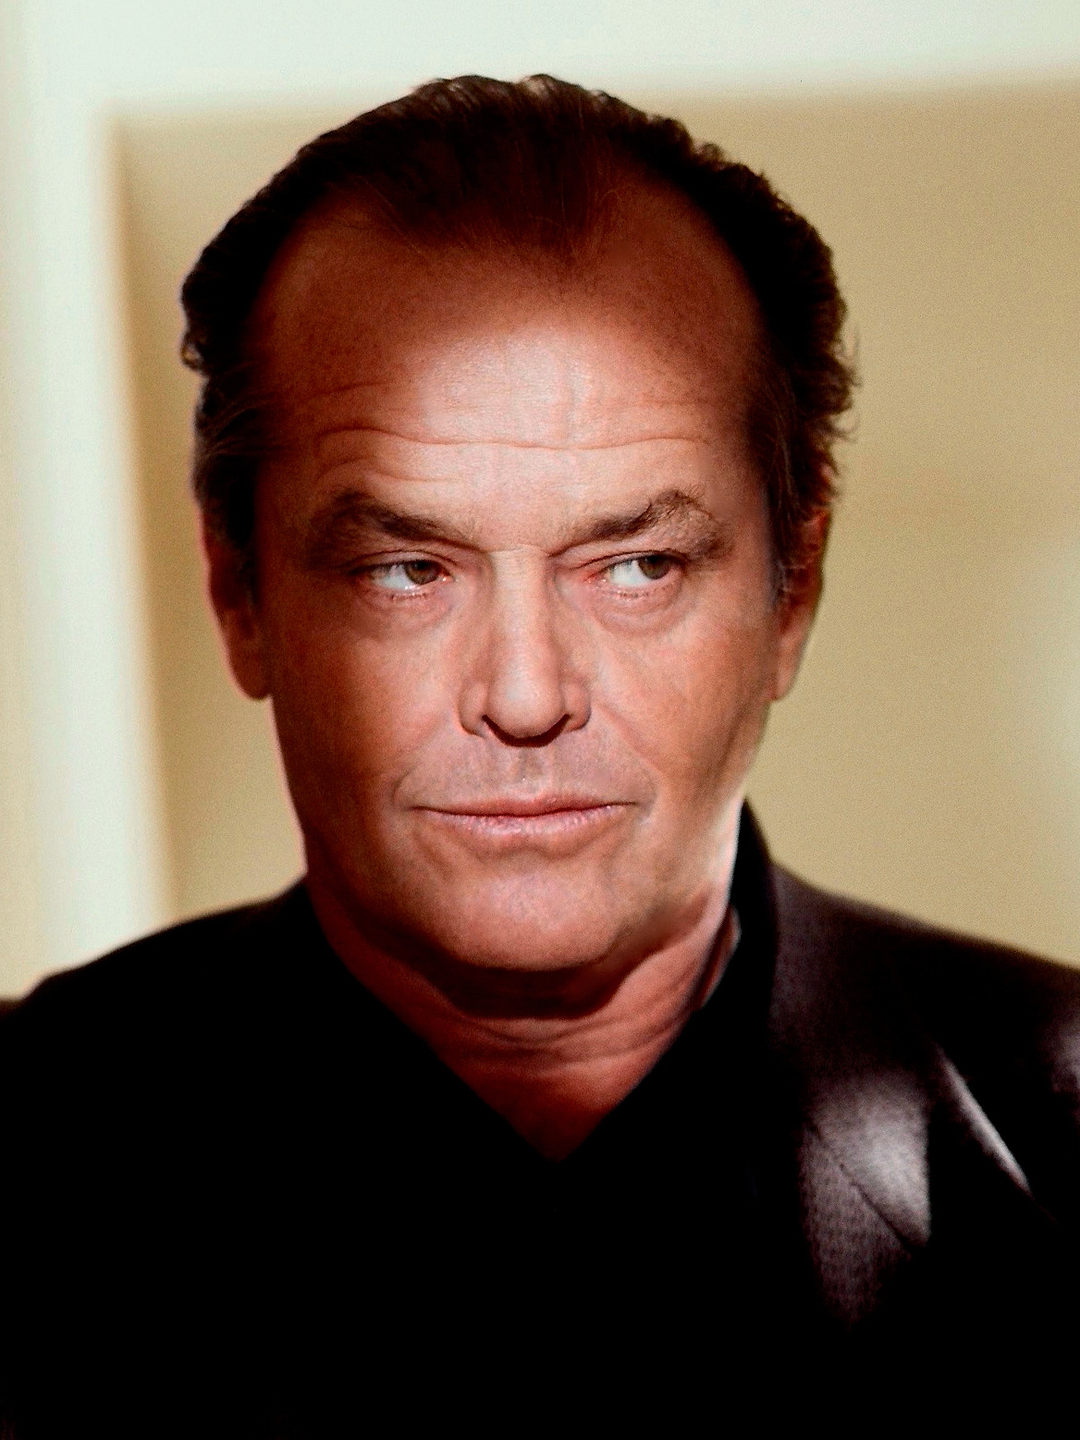 Jack Nicholson who is his mother